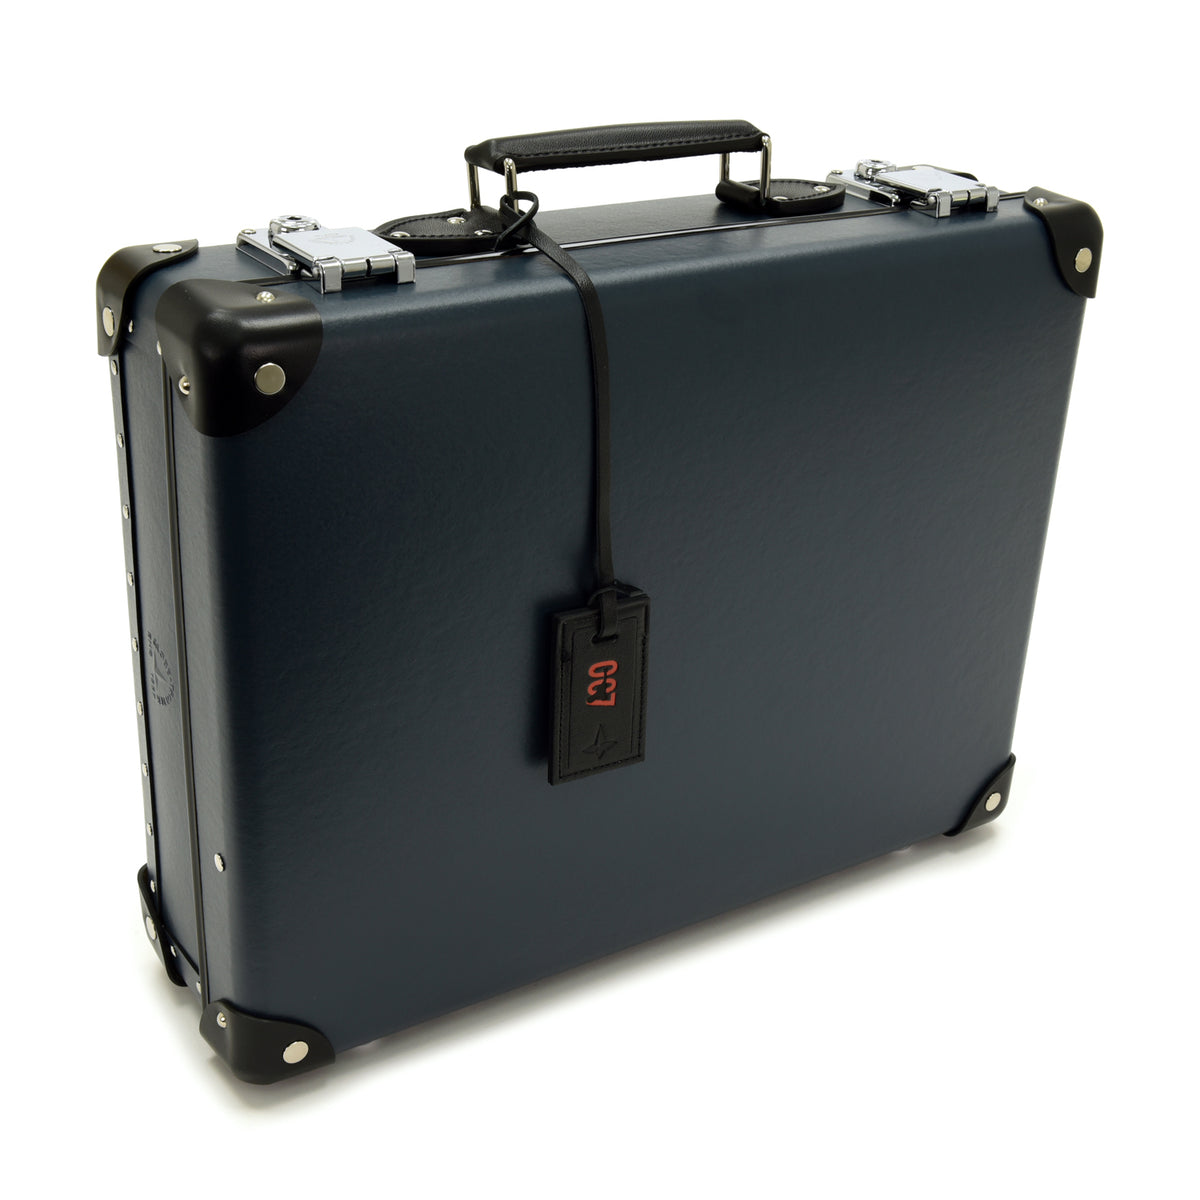 James Bond Dr. No Navy Attaché Case - 60th Anniversary Edition - By Globe-Trotter